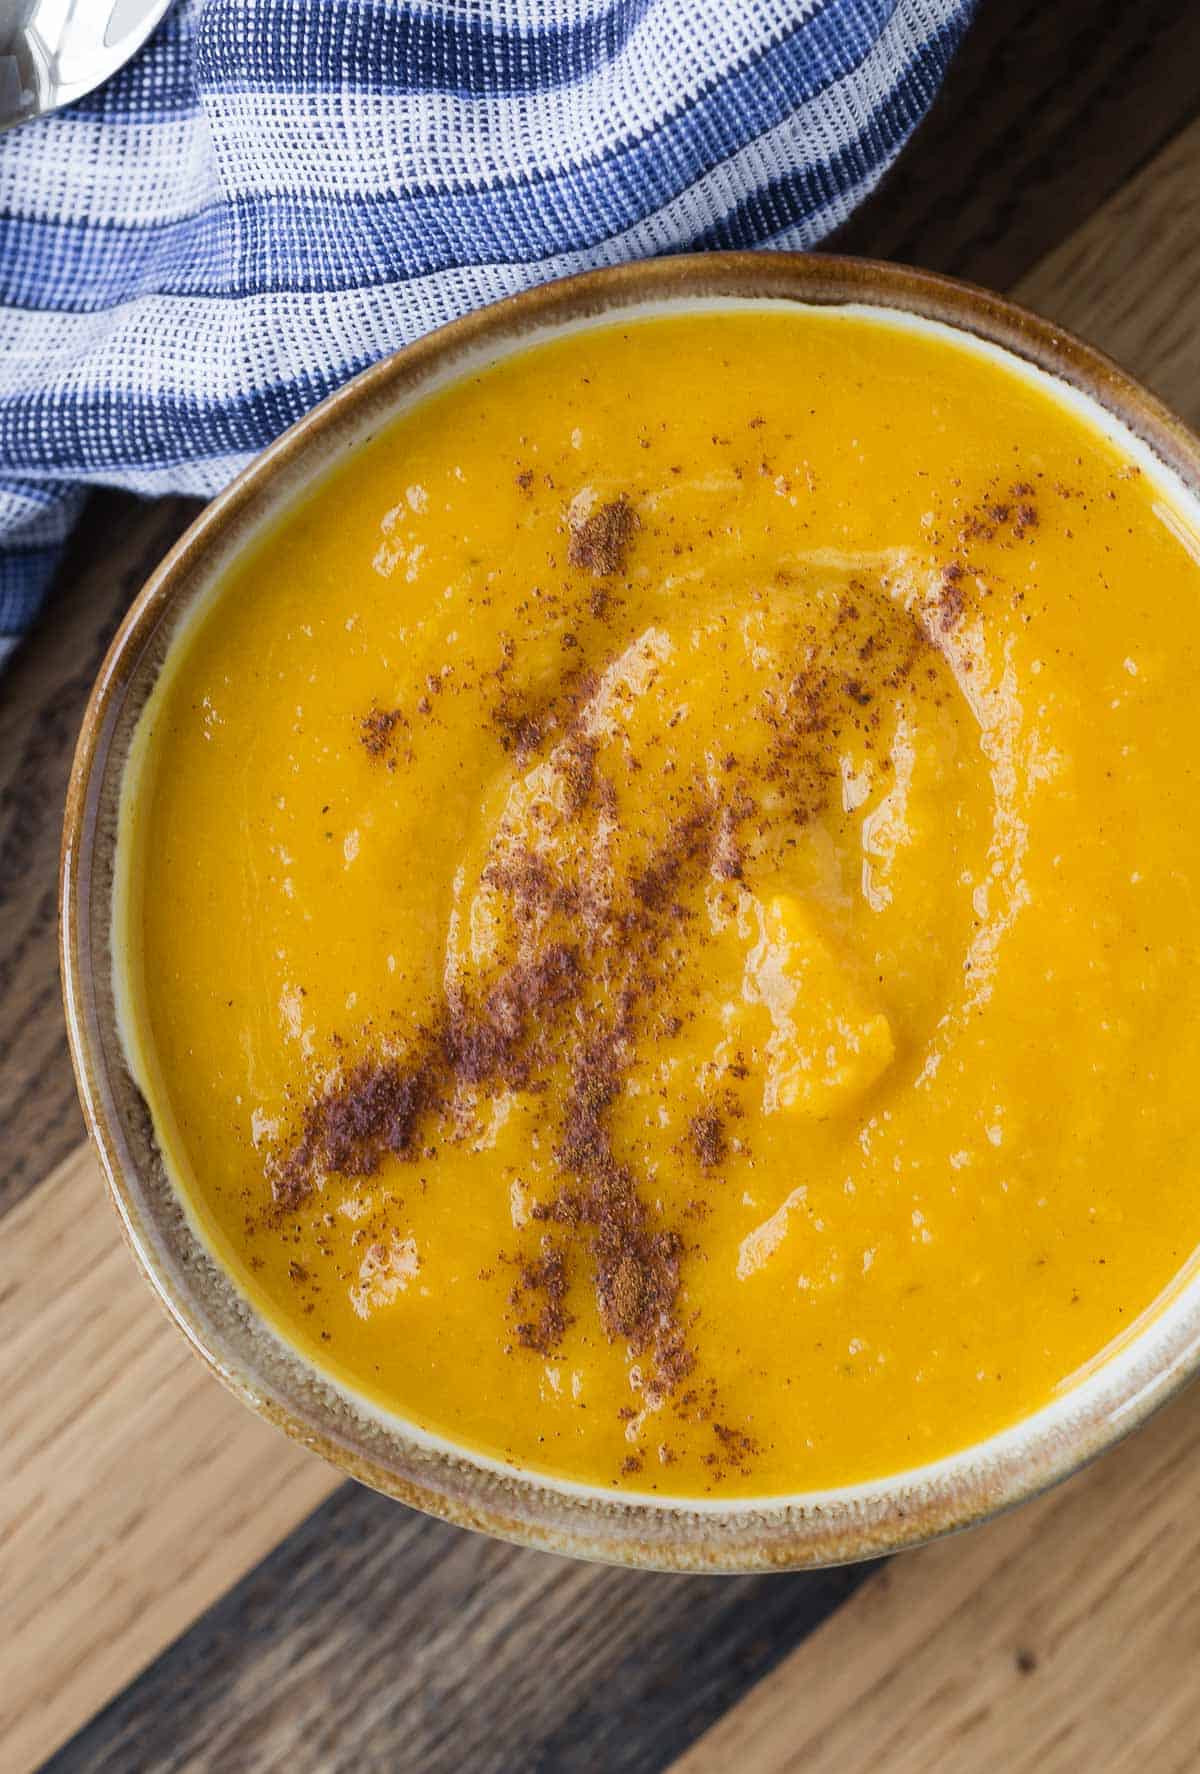 Overhead view of a bowl of kabocha squash soup.